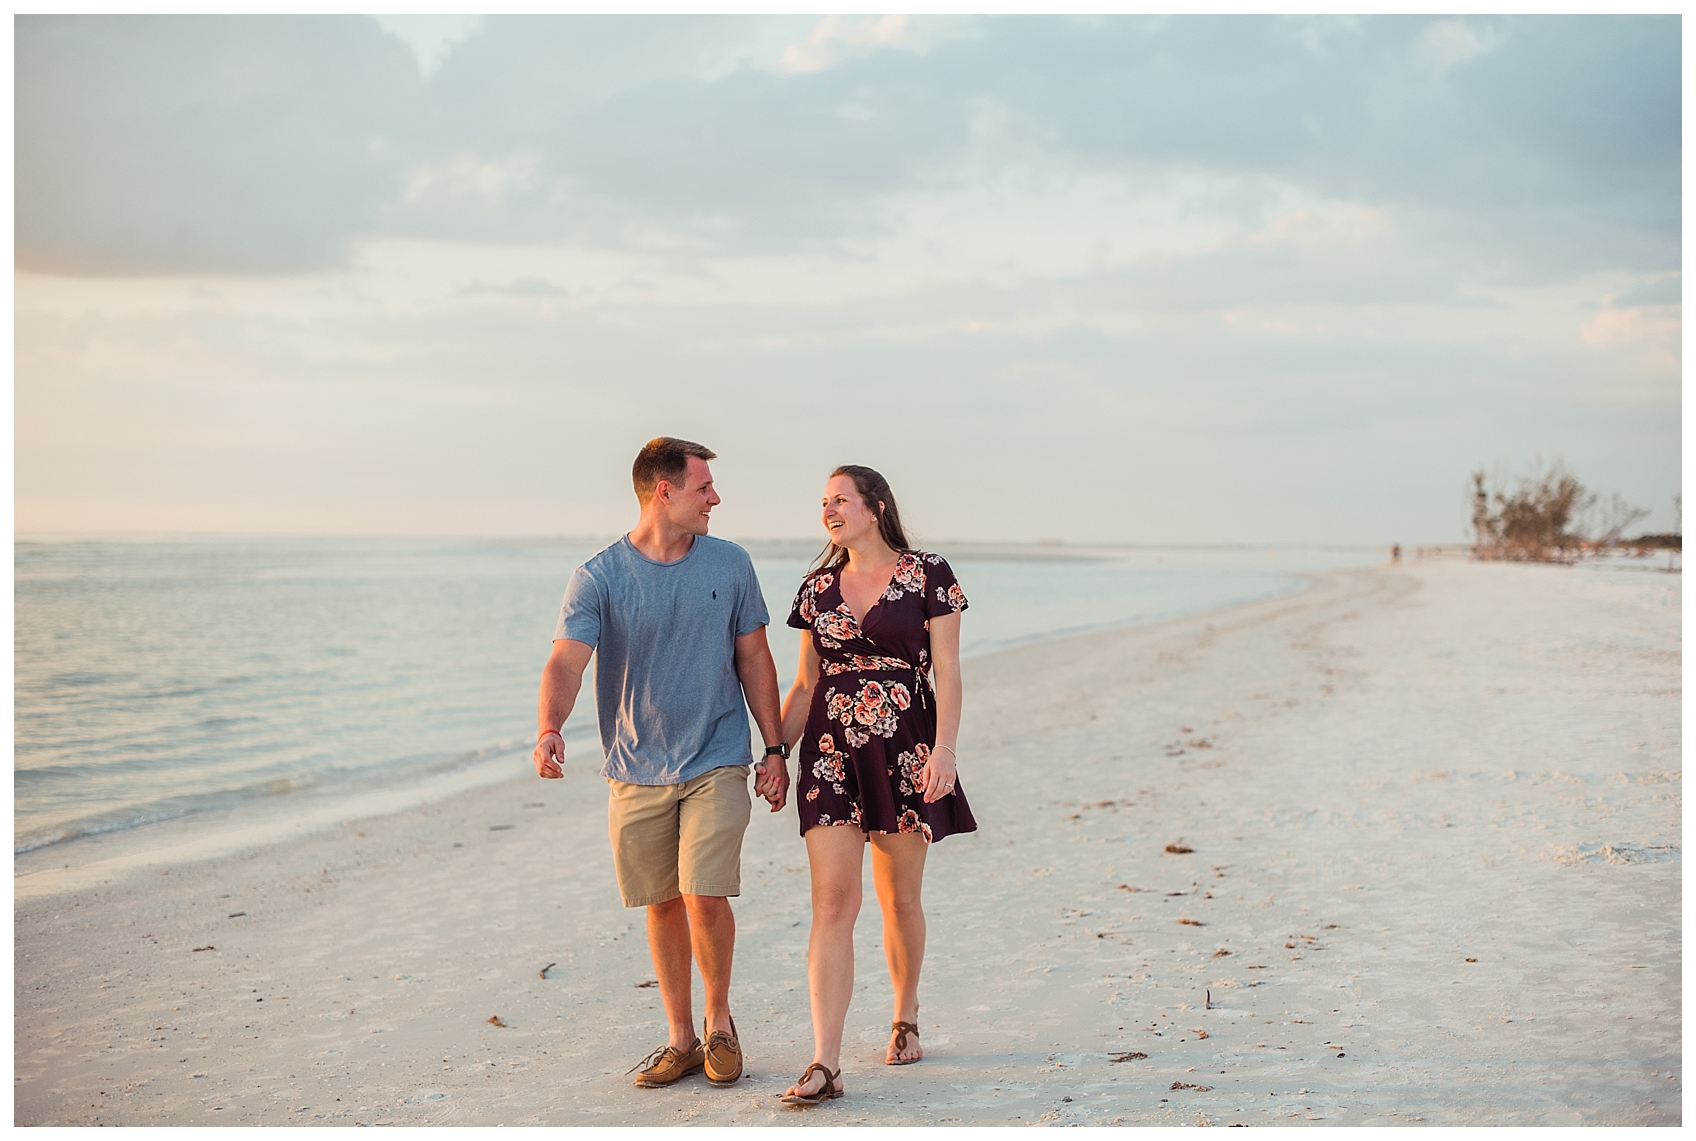 fort desoto, fort desoto beach, st petersburg beach, st pete beach, stpetersburg photographer, stpetersburg photography, st pete beach proposal photographer, tampa, tampa photographer, destination wedding, travelingphotographer, proposal photographer, tampa proposal photographer, fort desoto proposal, tampa wedding photographer, tampa wedding photography, orlando photographer, sarasota photographer, couple walking on beach, happy couple, smiling couple, couple holding hands, candid photography, candid couple photography, walking on the beach